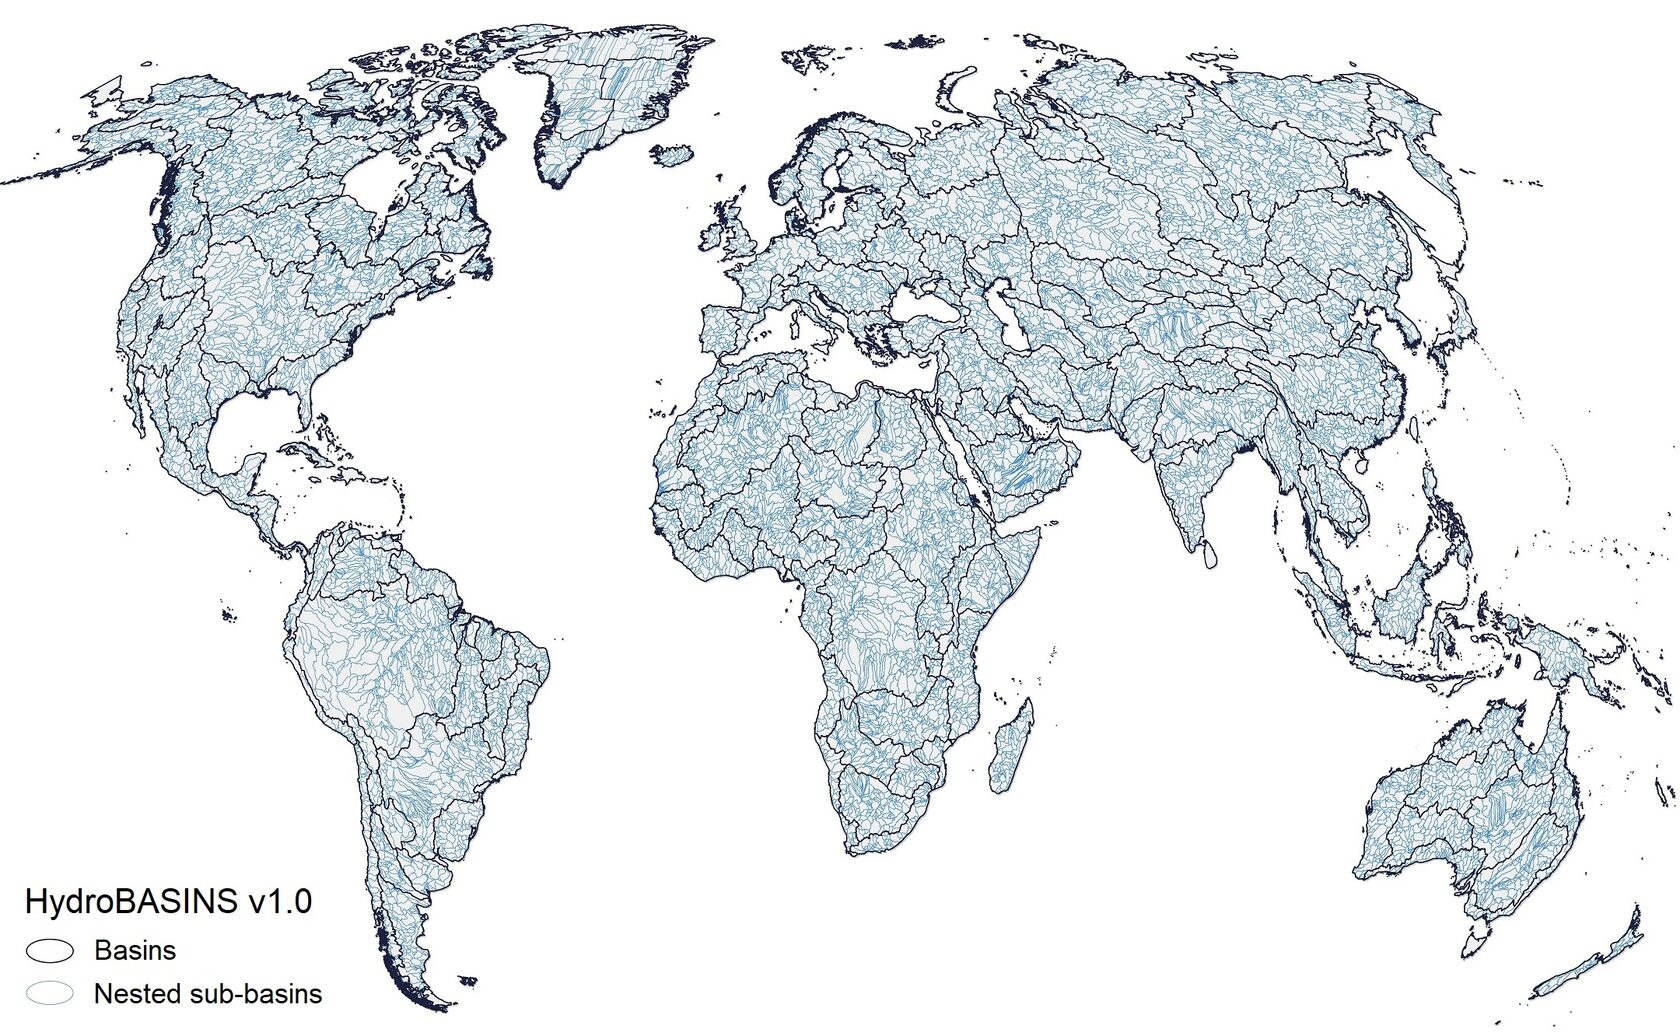 Global map of major river basins (outlined in black) and sub-basins (blue).